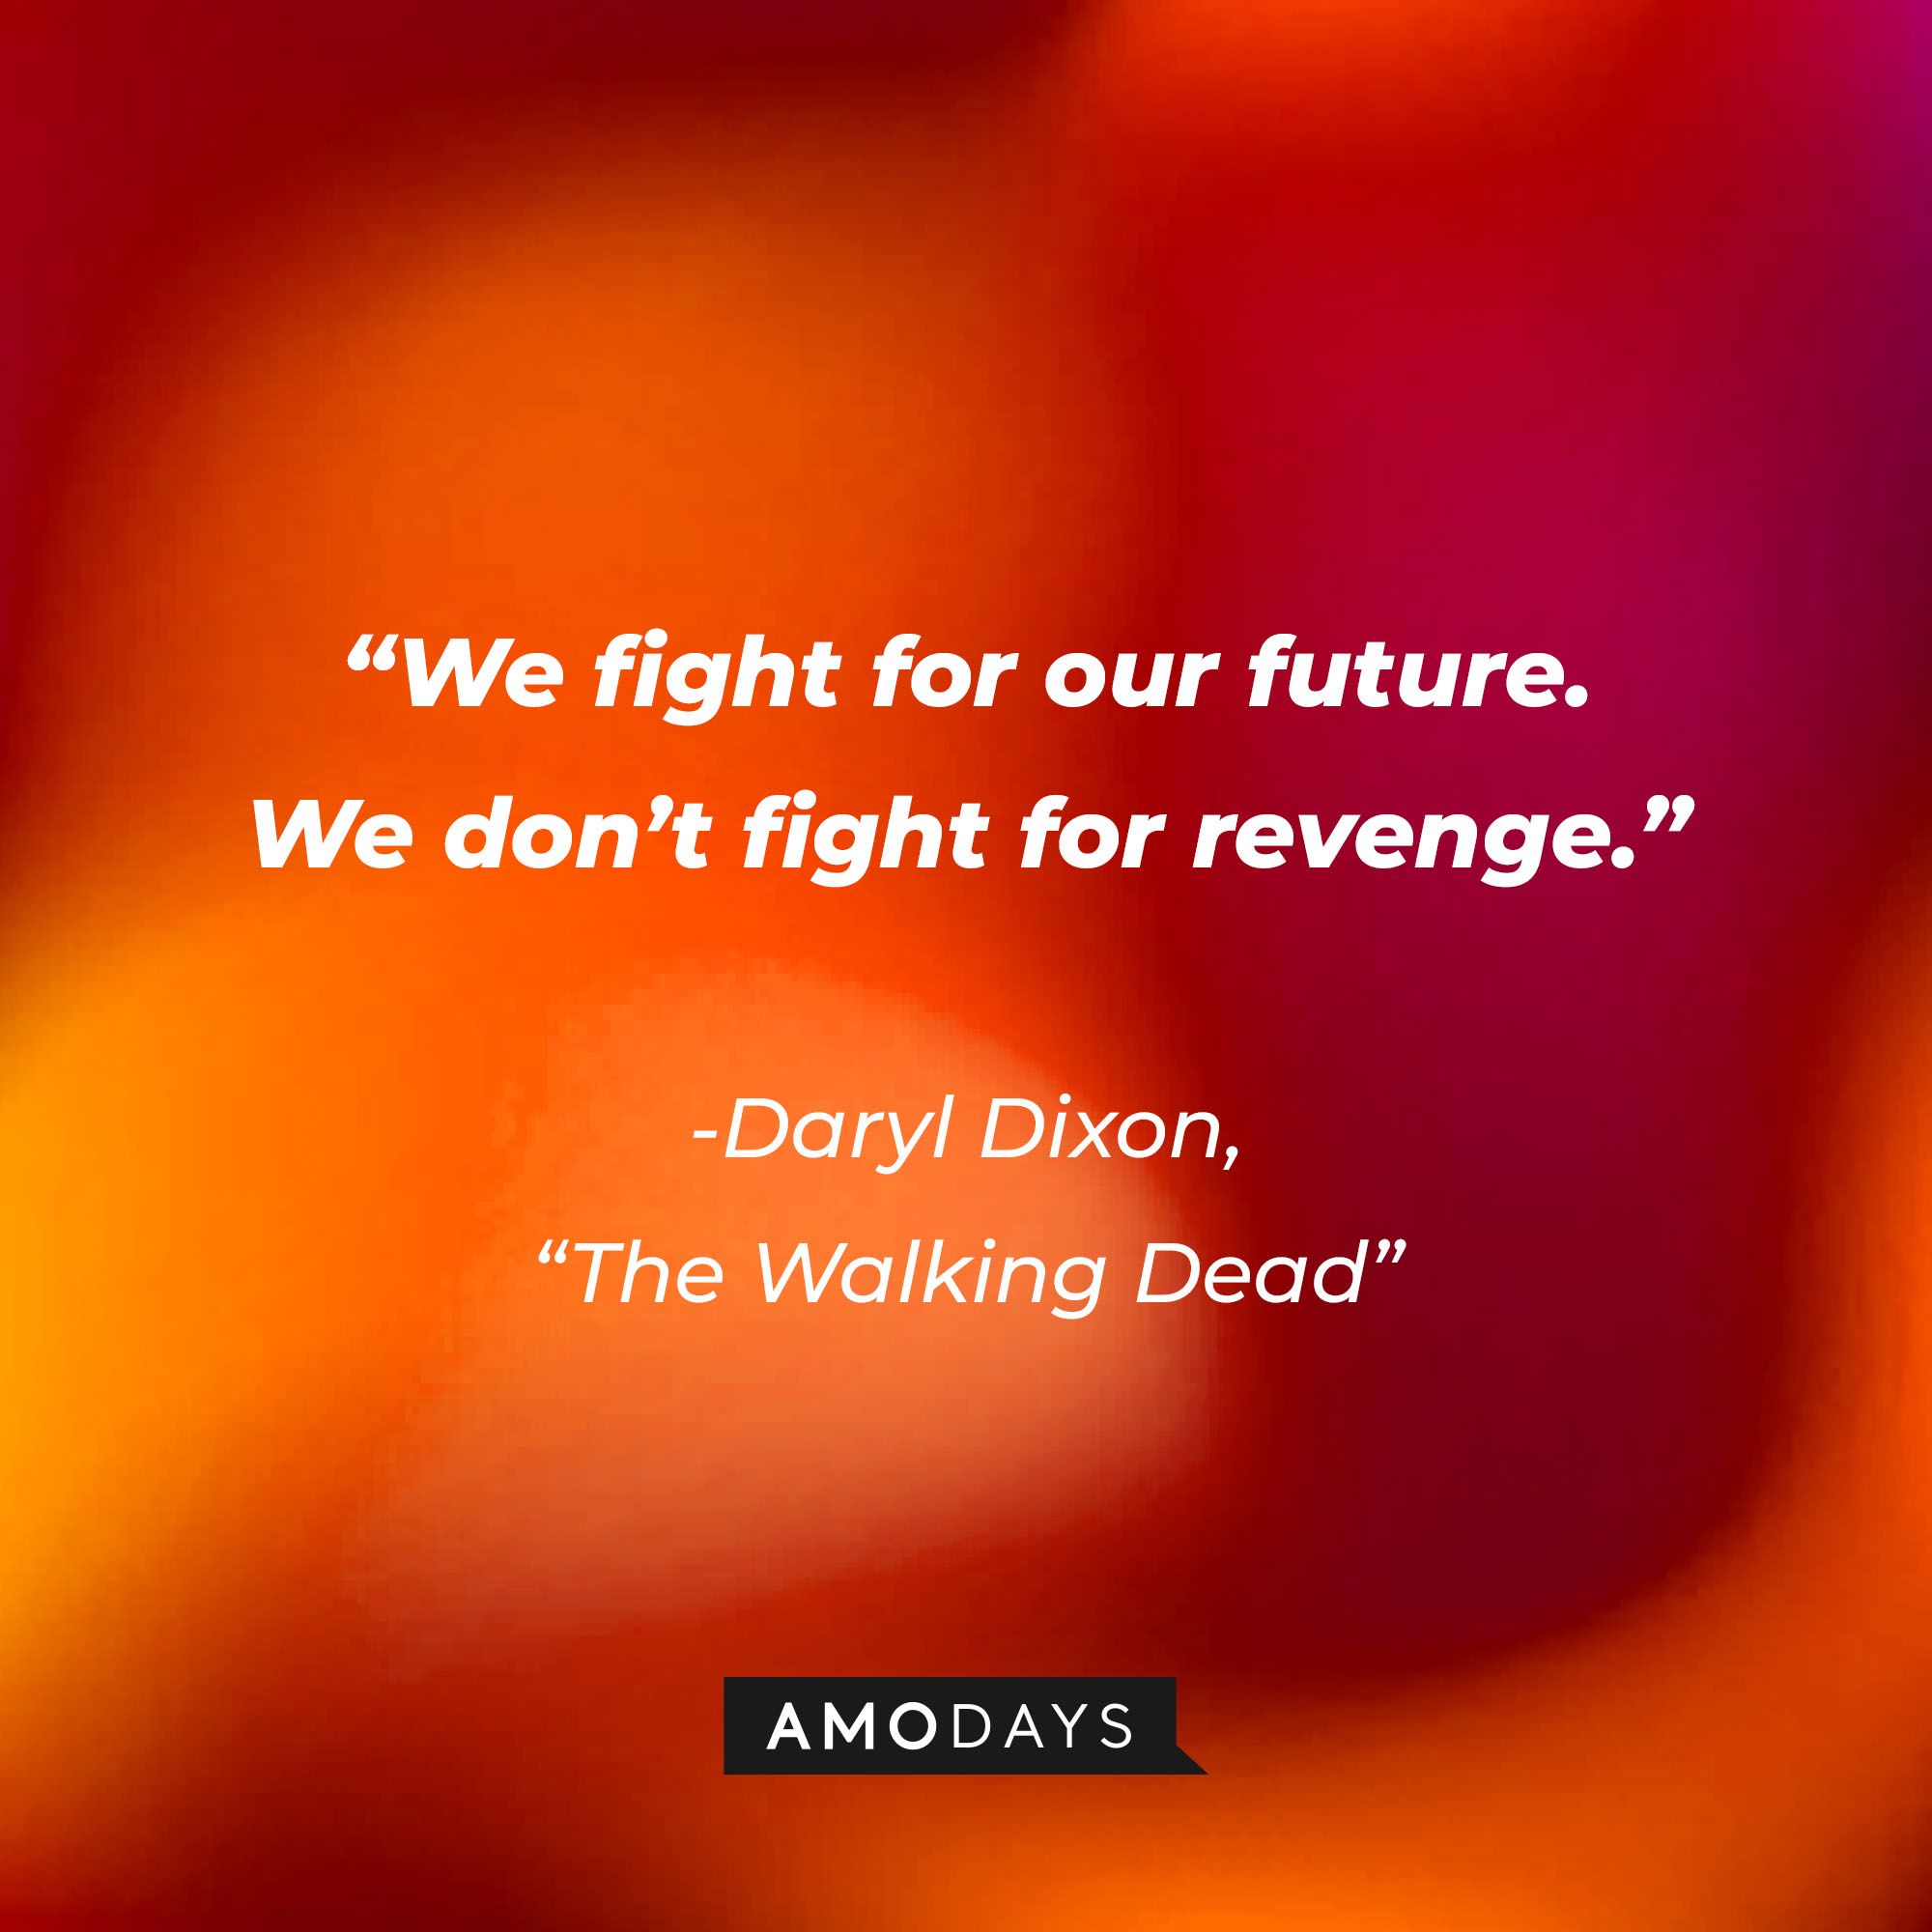 Daryl Dixon’s quote from “The Walking Dead”: “We fight for our future. We don’t fight for revenge.” | Source: AmoDays